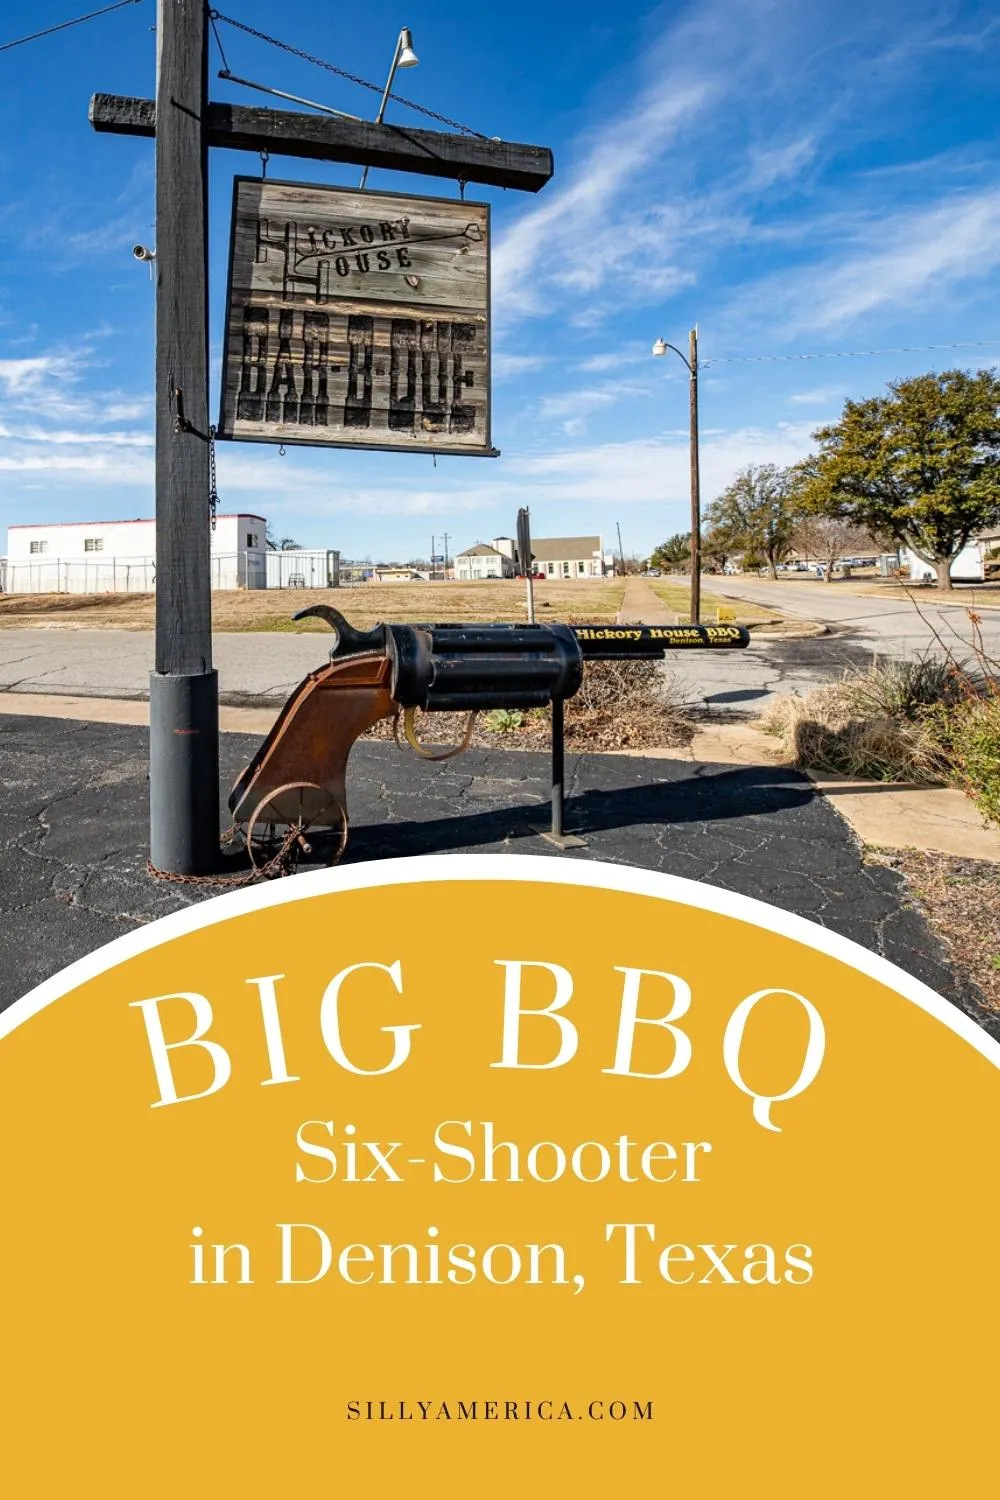 This roadside attraction is a smoking gun-literally. It's the Big BBQ Six-Shooter in Denison, Texas. Talk about bringing out the big guns! Visit this local roadside attraction on your next Texas road trip. Add it to your travel itinerary! #RoadTrip #texasRoadTrip #FortWorth #FortWorthTexas #FortWorthAttractions #FortWorthTexasAttractions #RoadsideAttraction #RoadsideAttractions #TexasRoadsideAttraction #TexasRoadsideAttractions